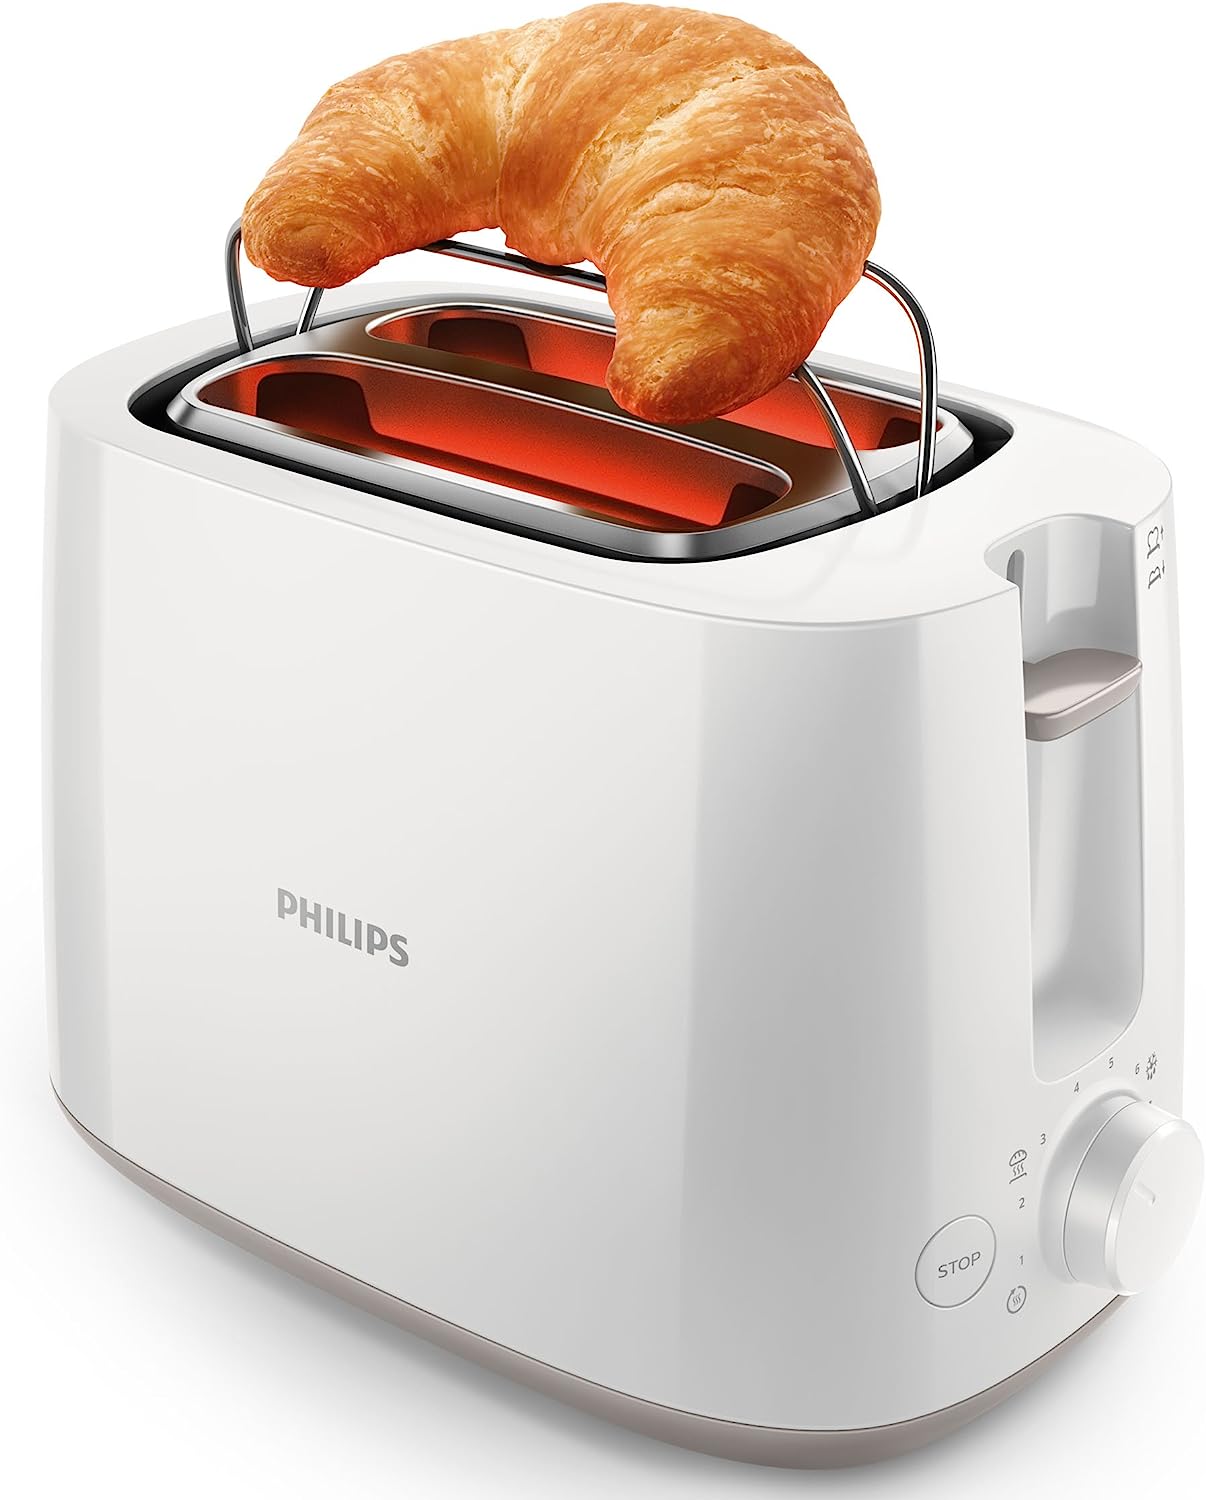 Philips HR2105/00 Blender 1.5 L Glass Container, 400 W, ProBlend 4 Technology, White & HD2581/00 Toaster, Integrated Bun Attachment, 8 Browning Levels, White